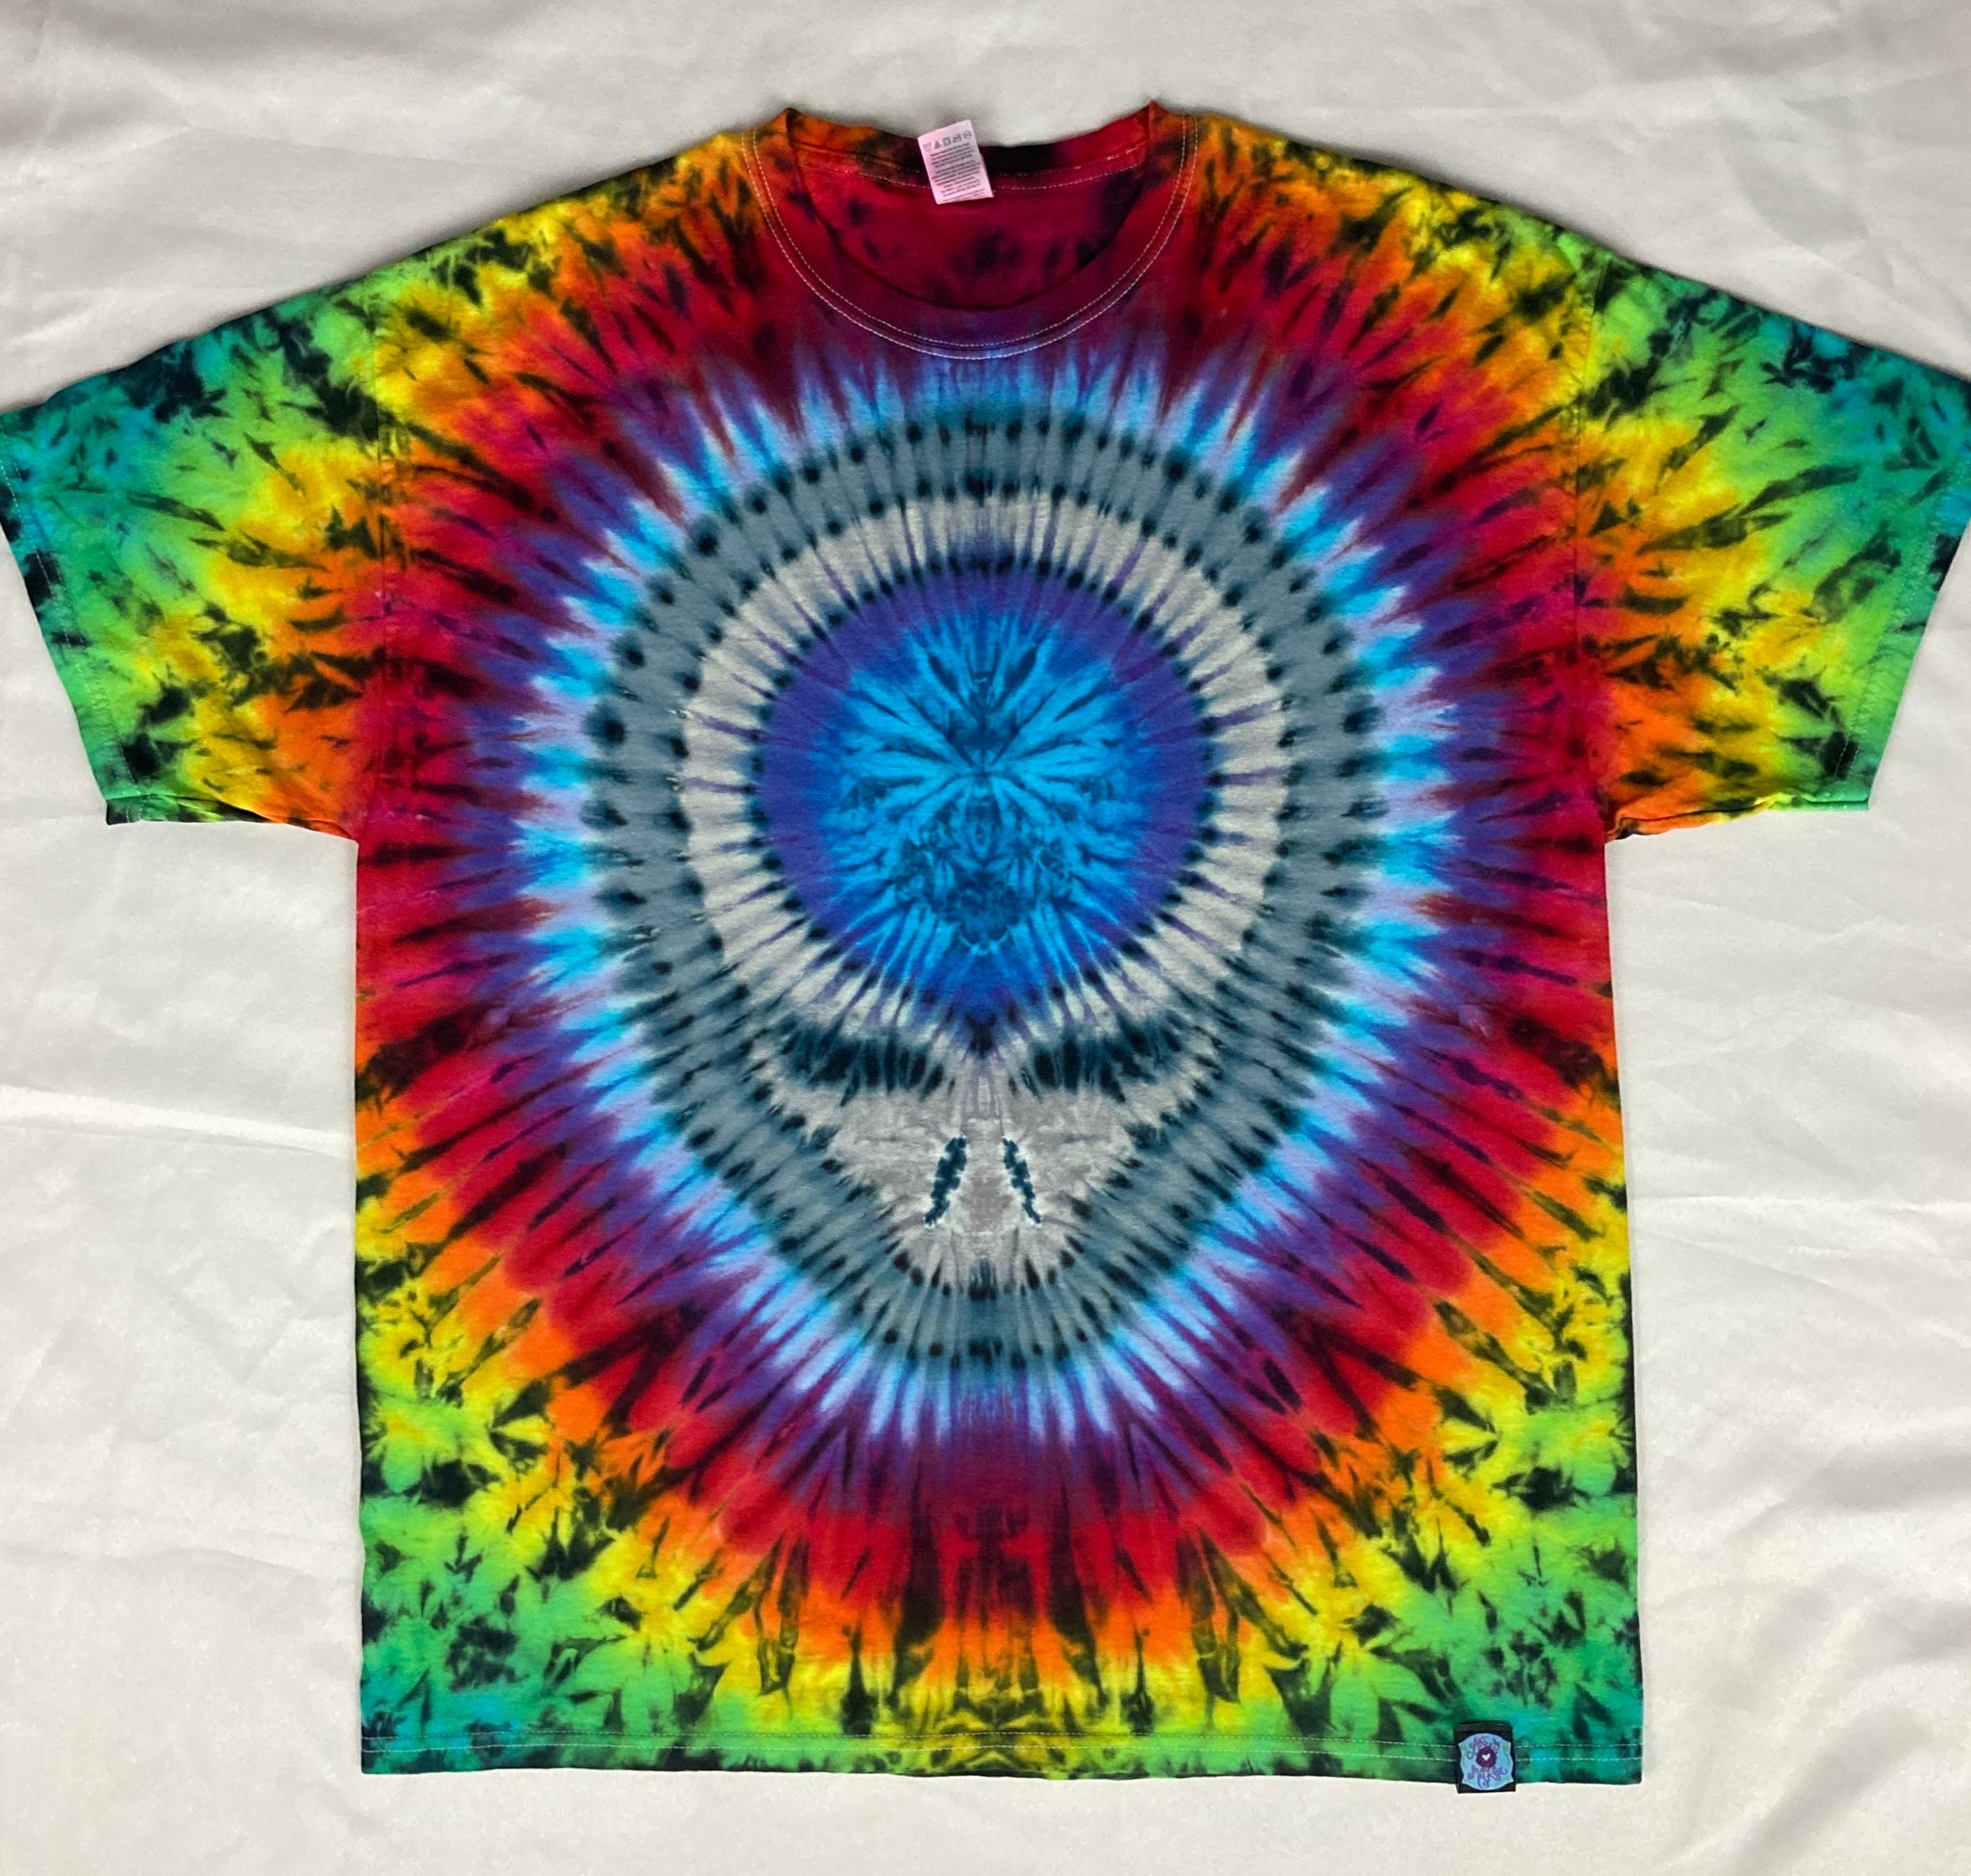 Adult Rainbow SYF Tie-Dyed Tee, XL